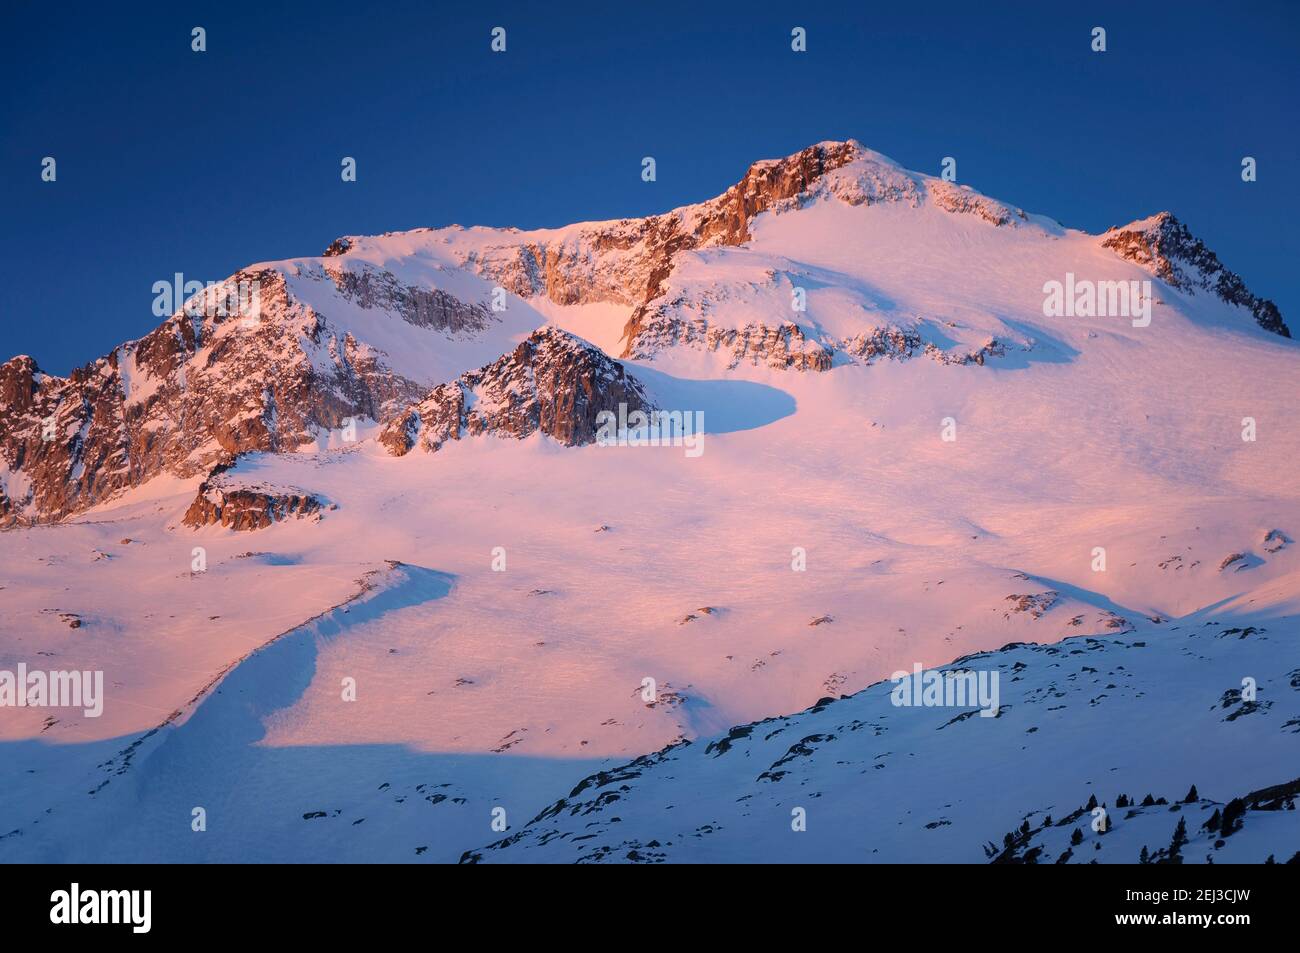 Winter sunrise in the Aneto summit and Maladetas massif, seen from Plan d'Aigualluts (Benasque valley, Pyrenees, Spain) Stock Photo